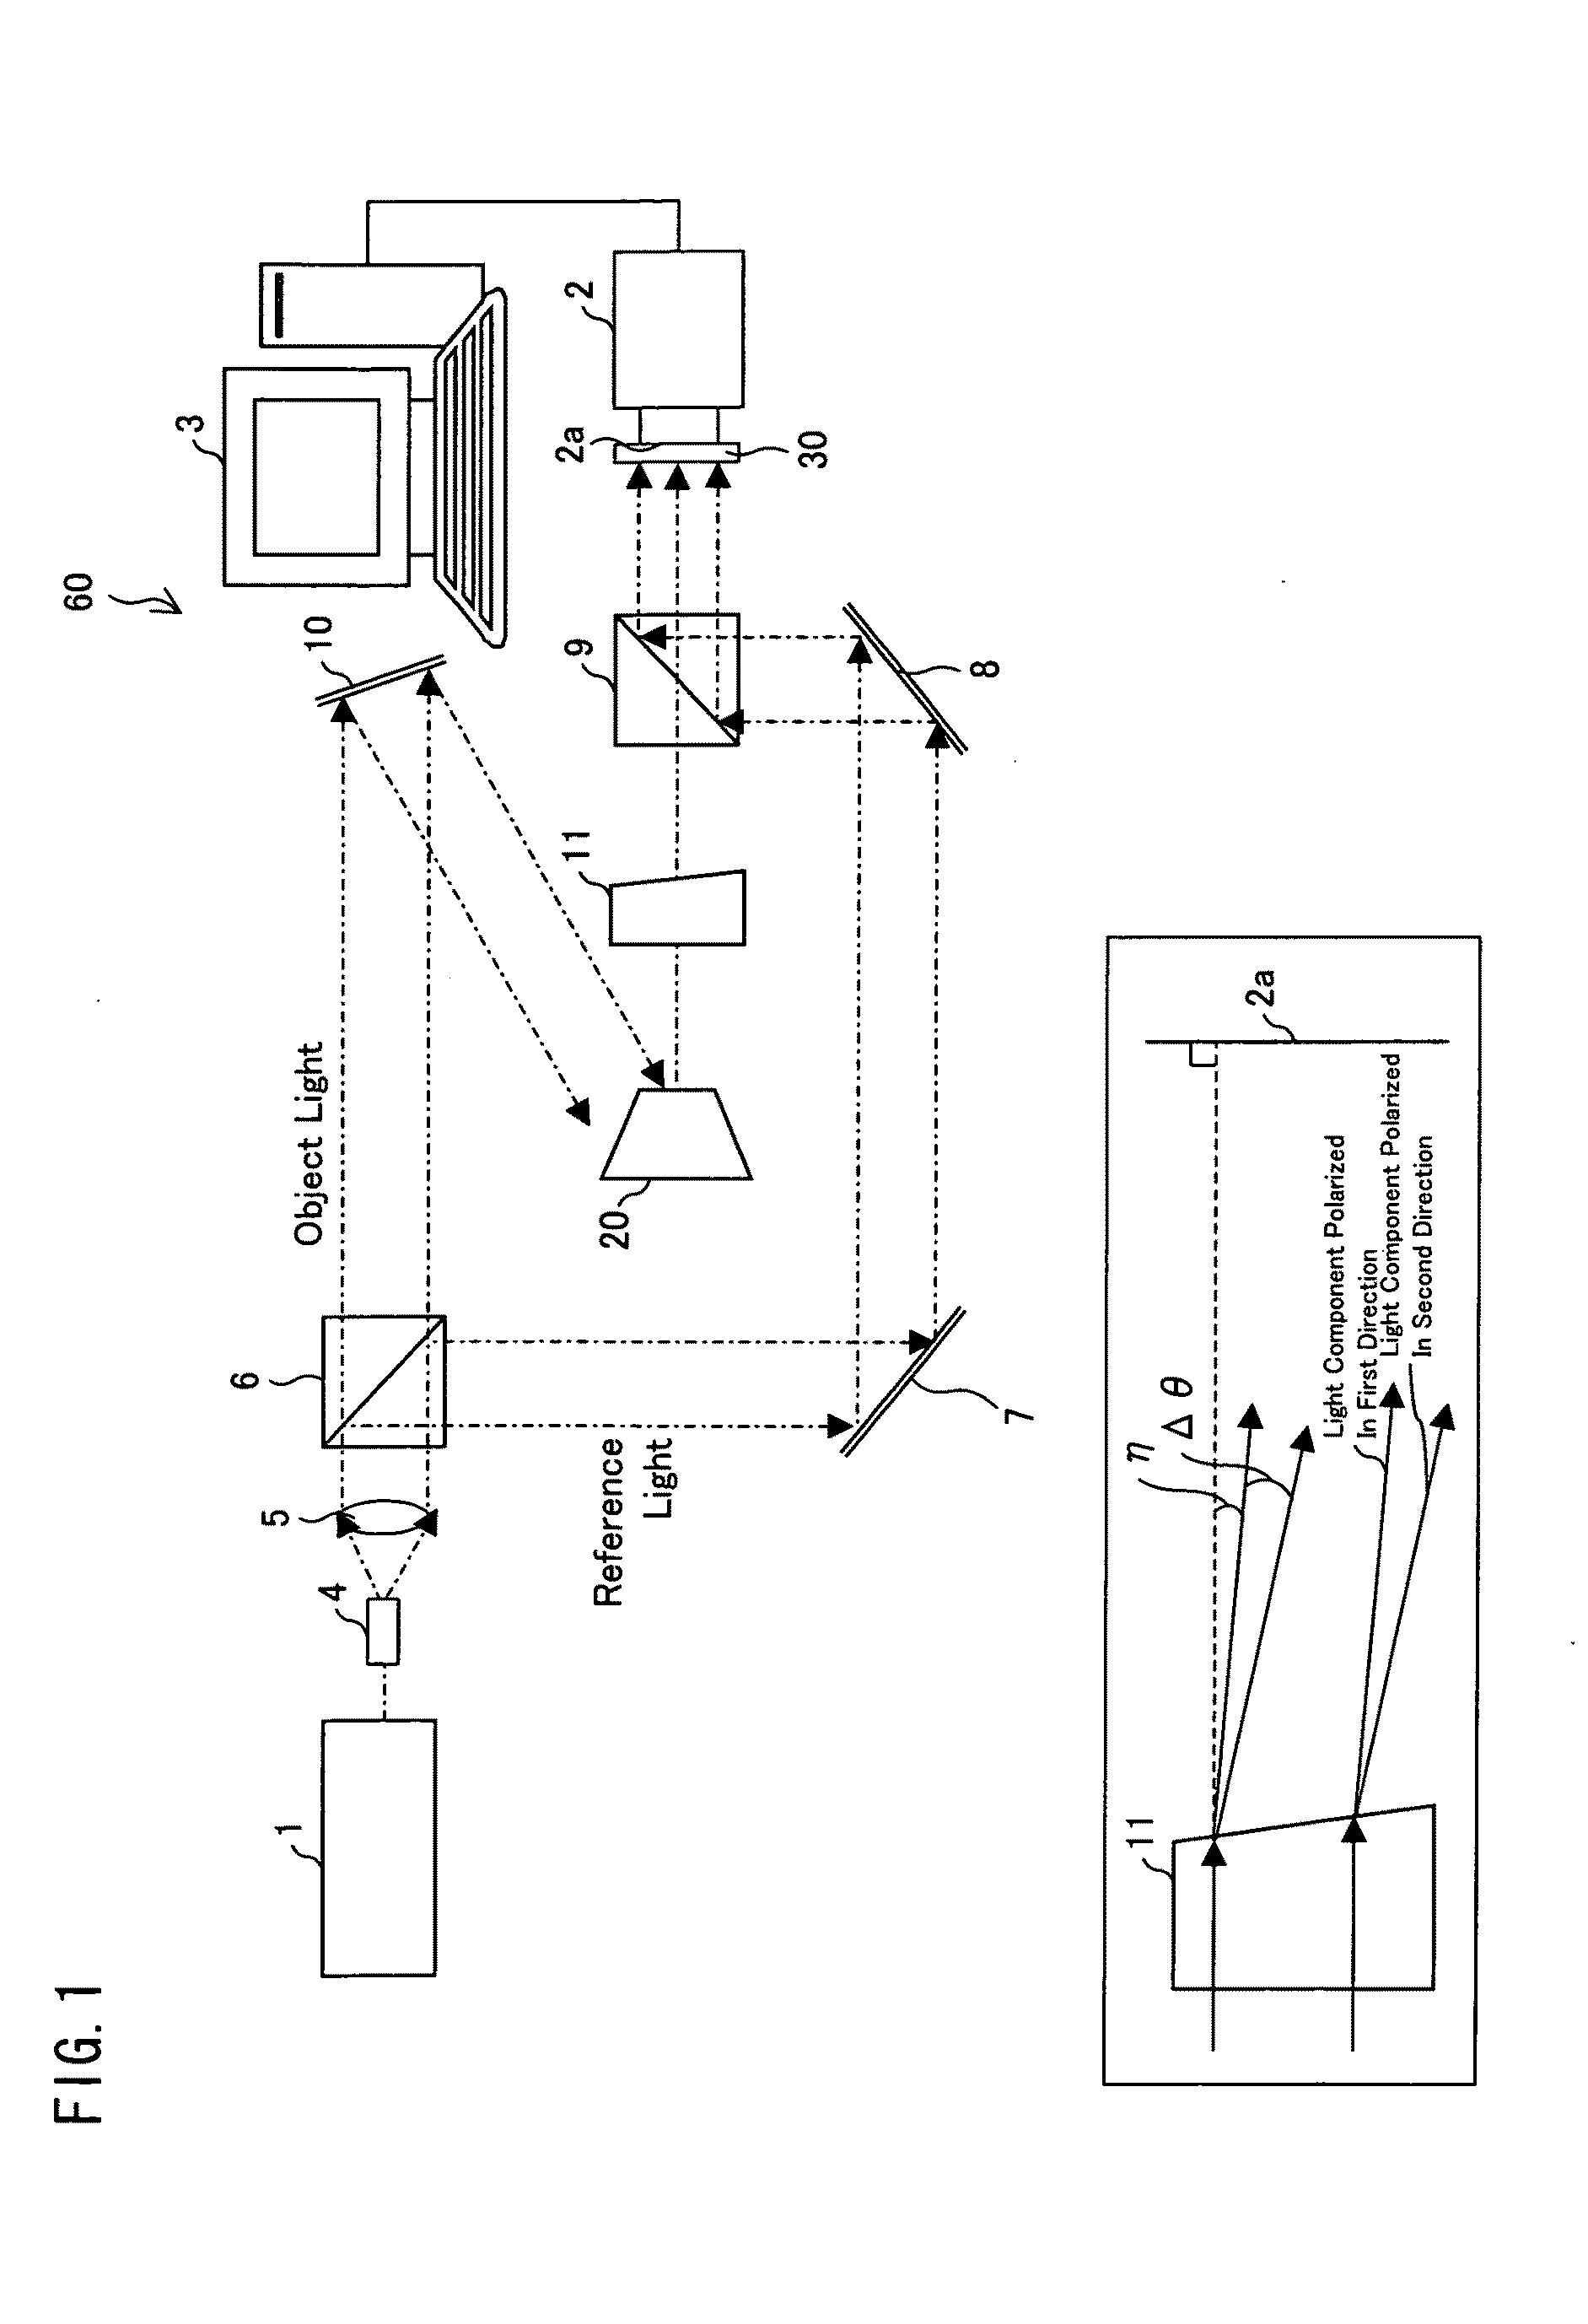 Interference measurement apparatus and method for measuring interference